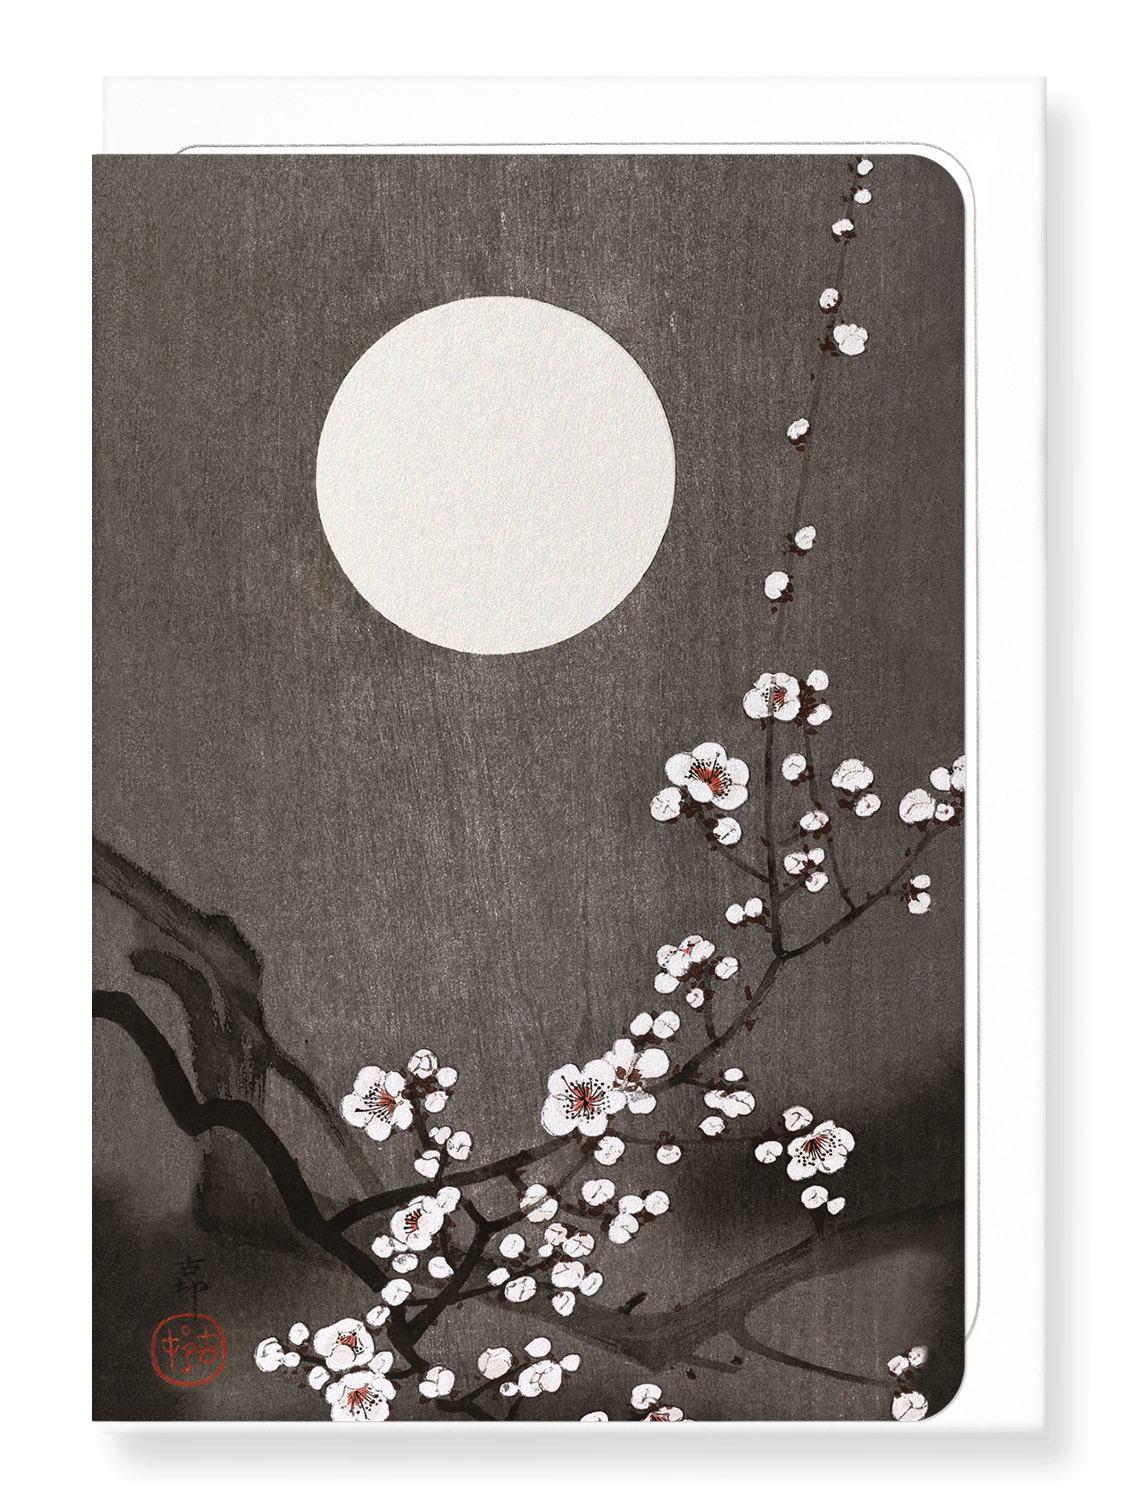 Ezen Designs - Flowering plum blossom at full moon - Greeting Card - Front